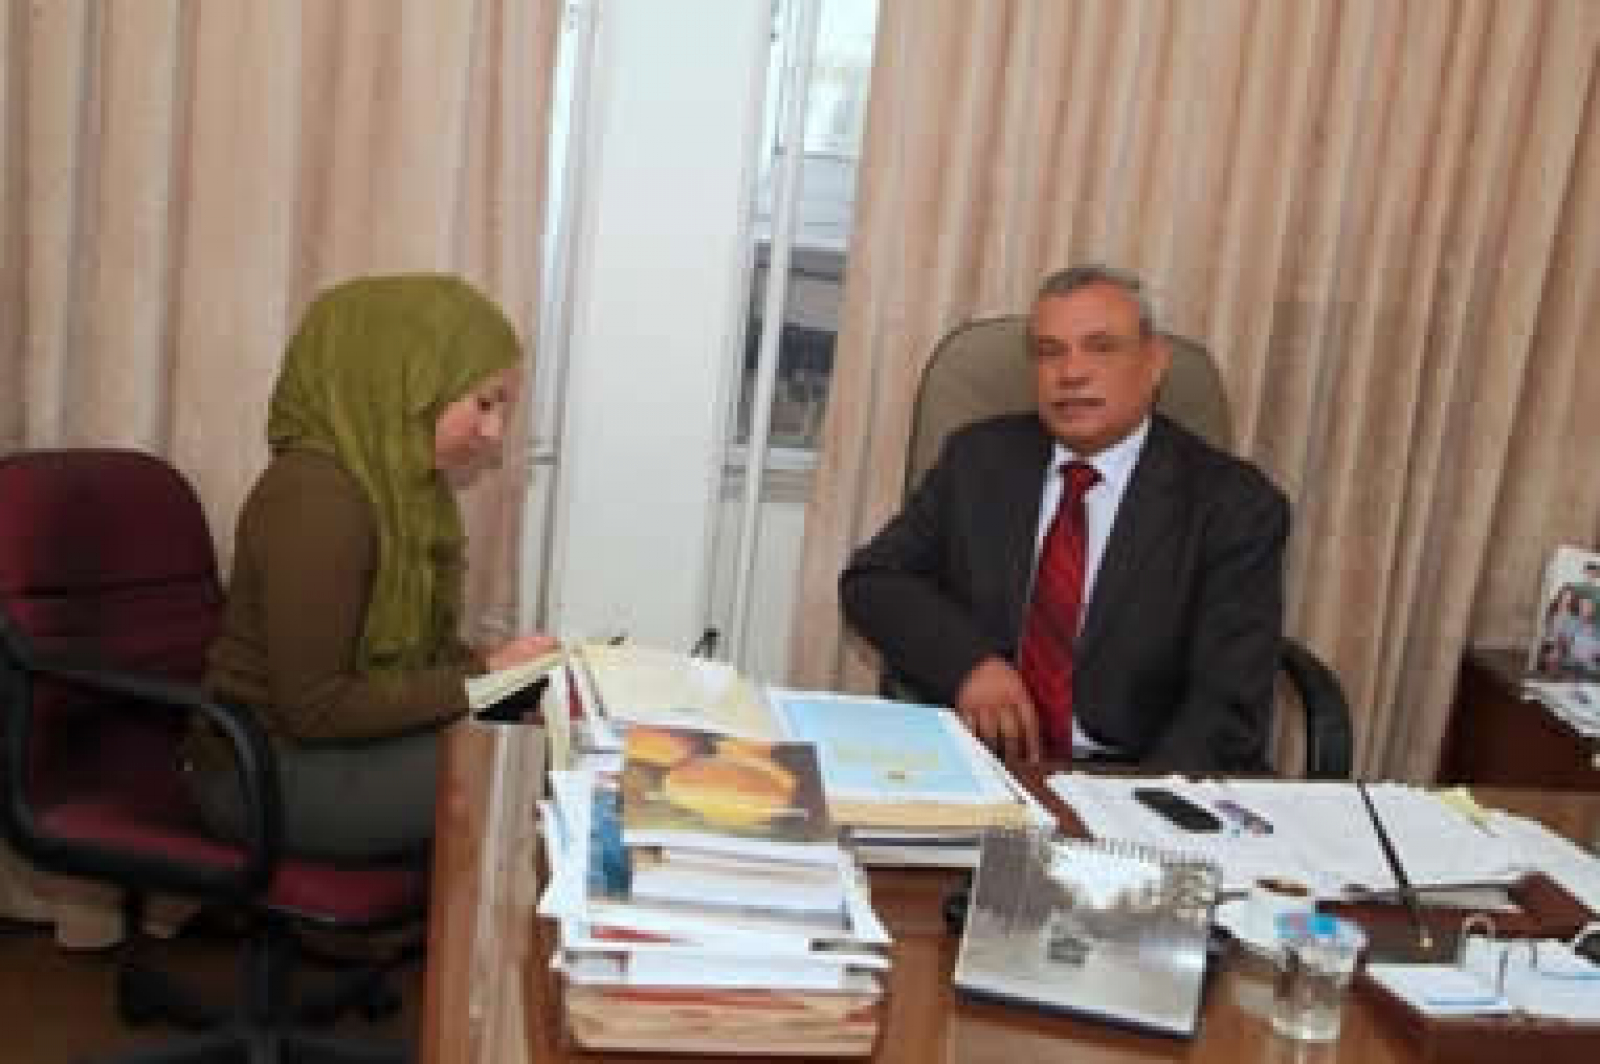 Leading Jordanian Research Center Promotes Parliamentary Openness and Accountability